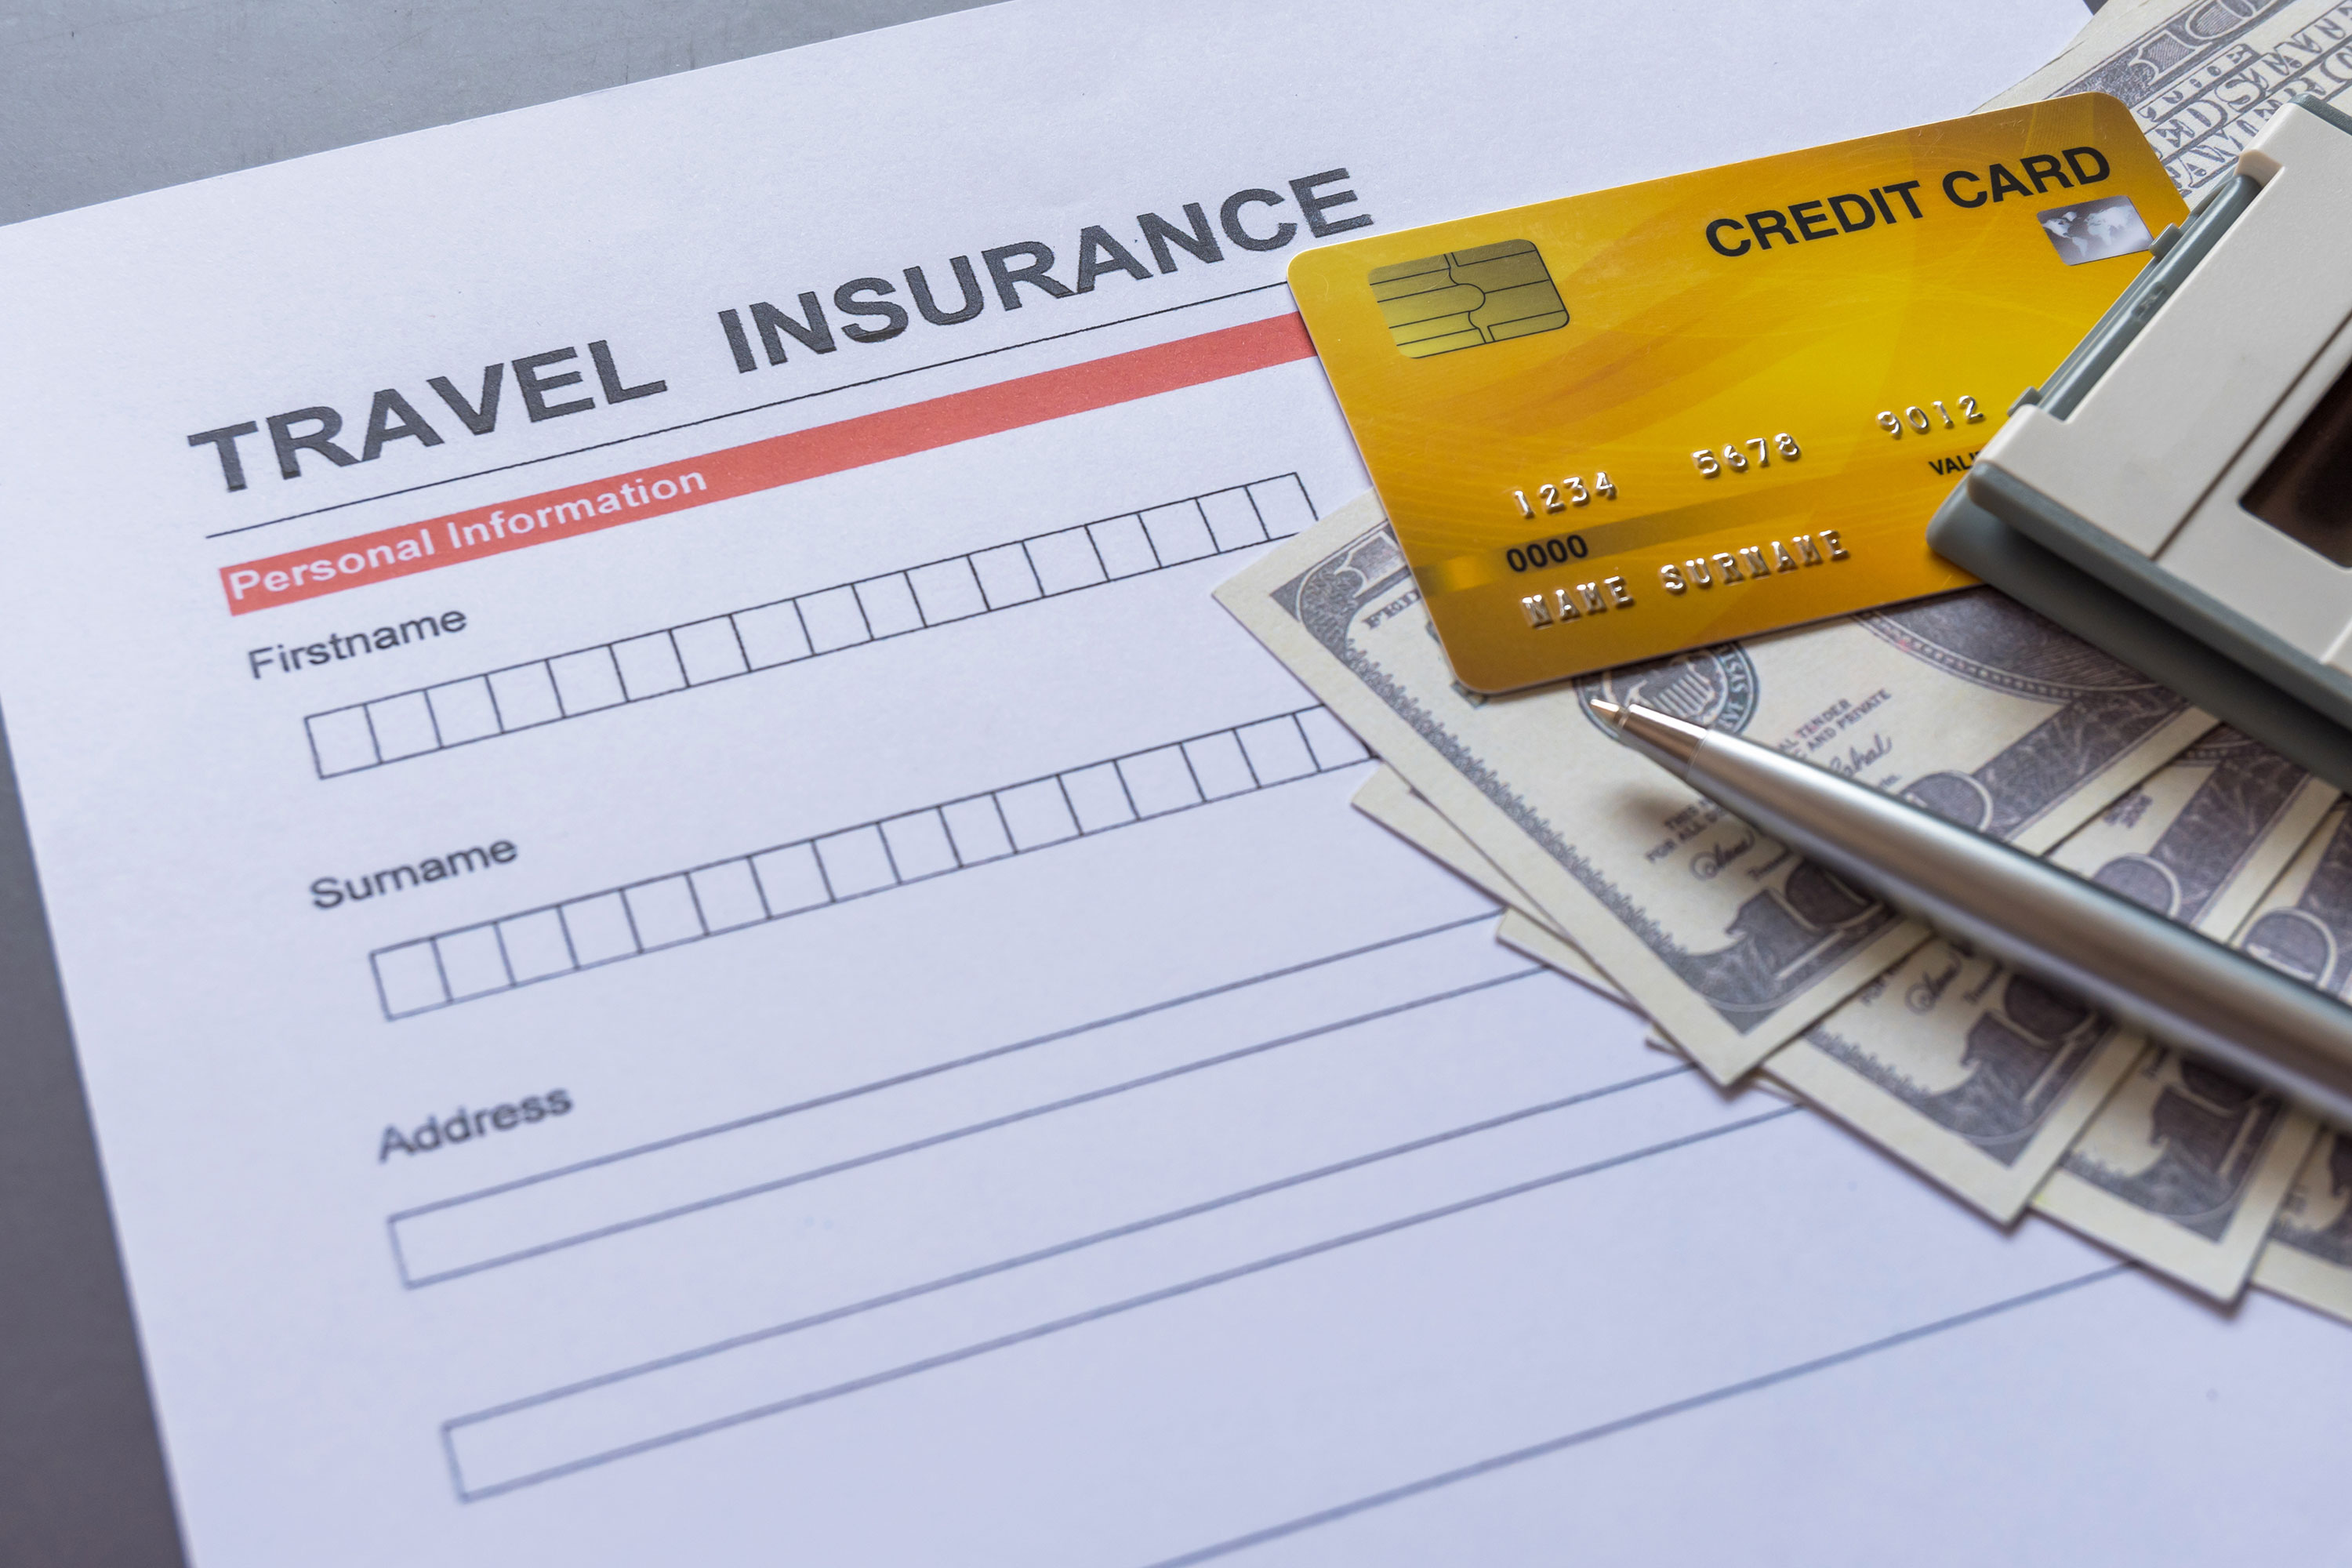 What is Deductible in Travel Insurance?